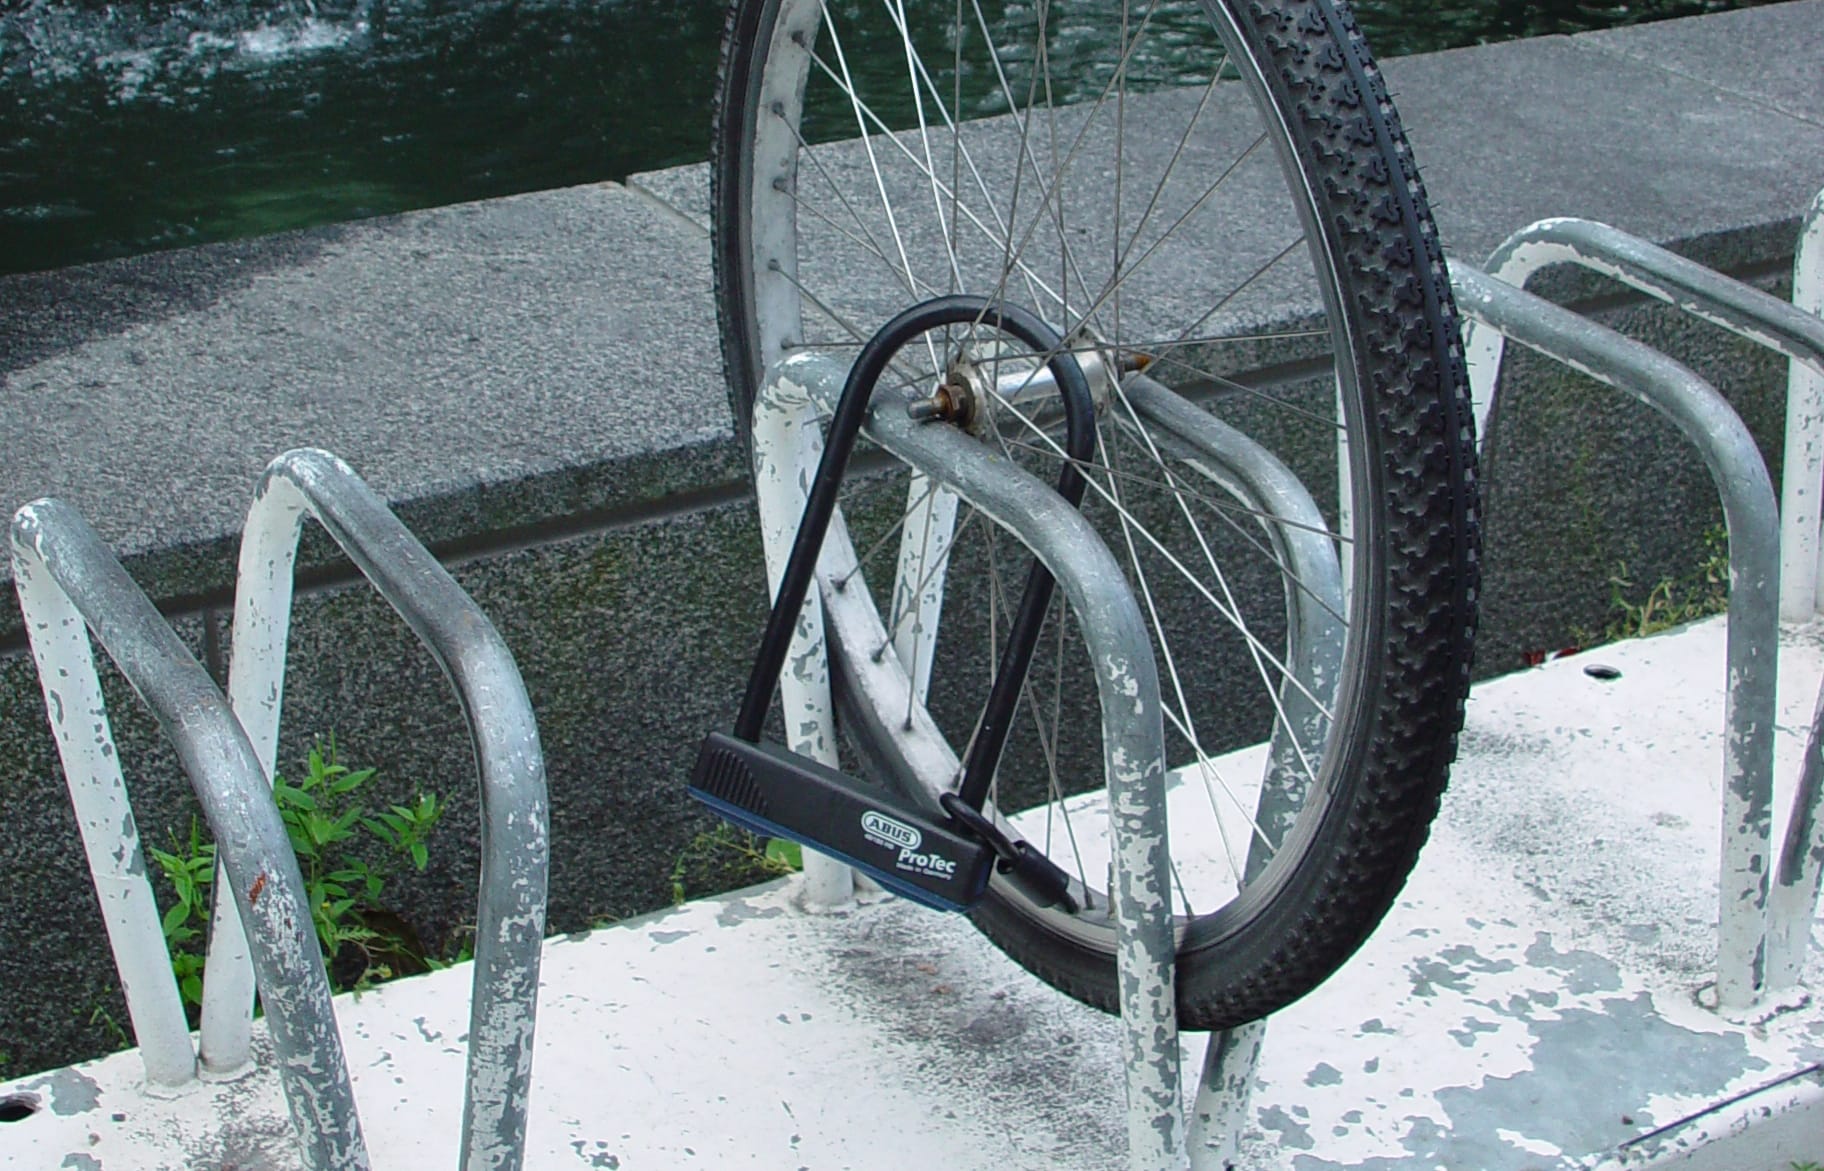 There's been a spate of bike thefts in Wellington